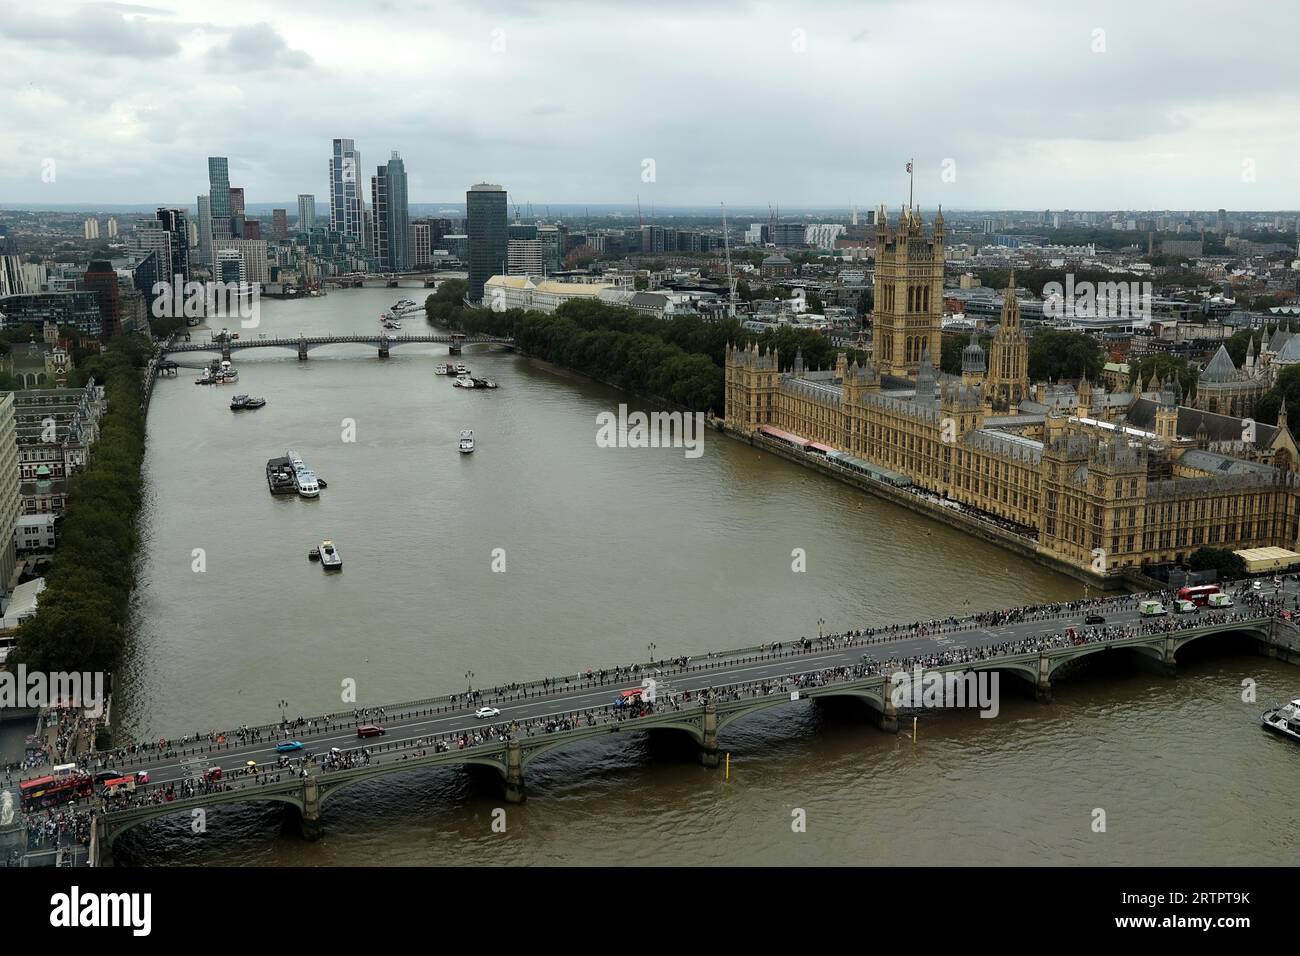 The River Thames and the Palace of Parliament seen from above from the eye of London. Stock Photo